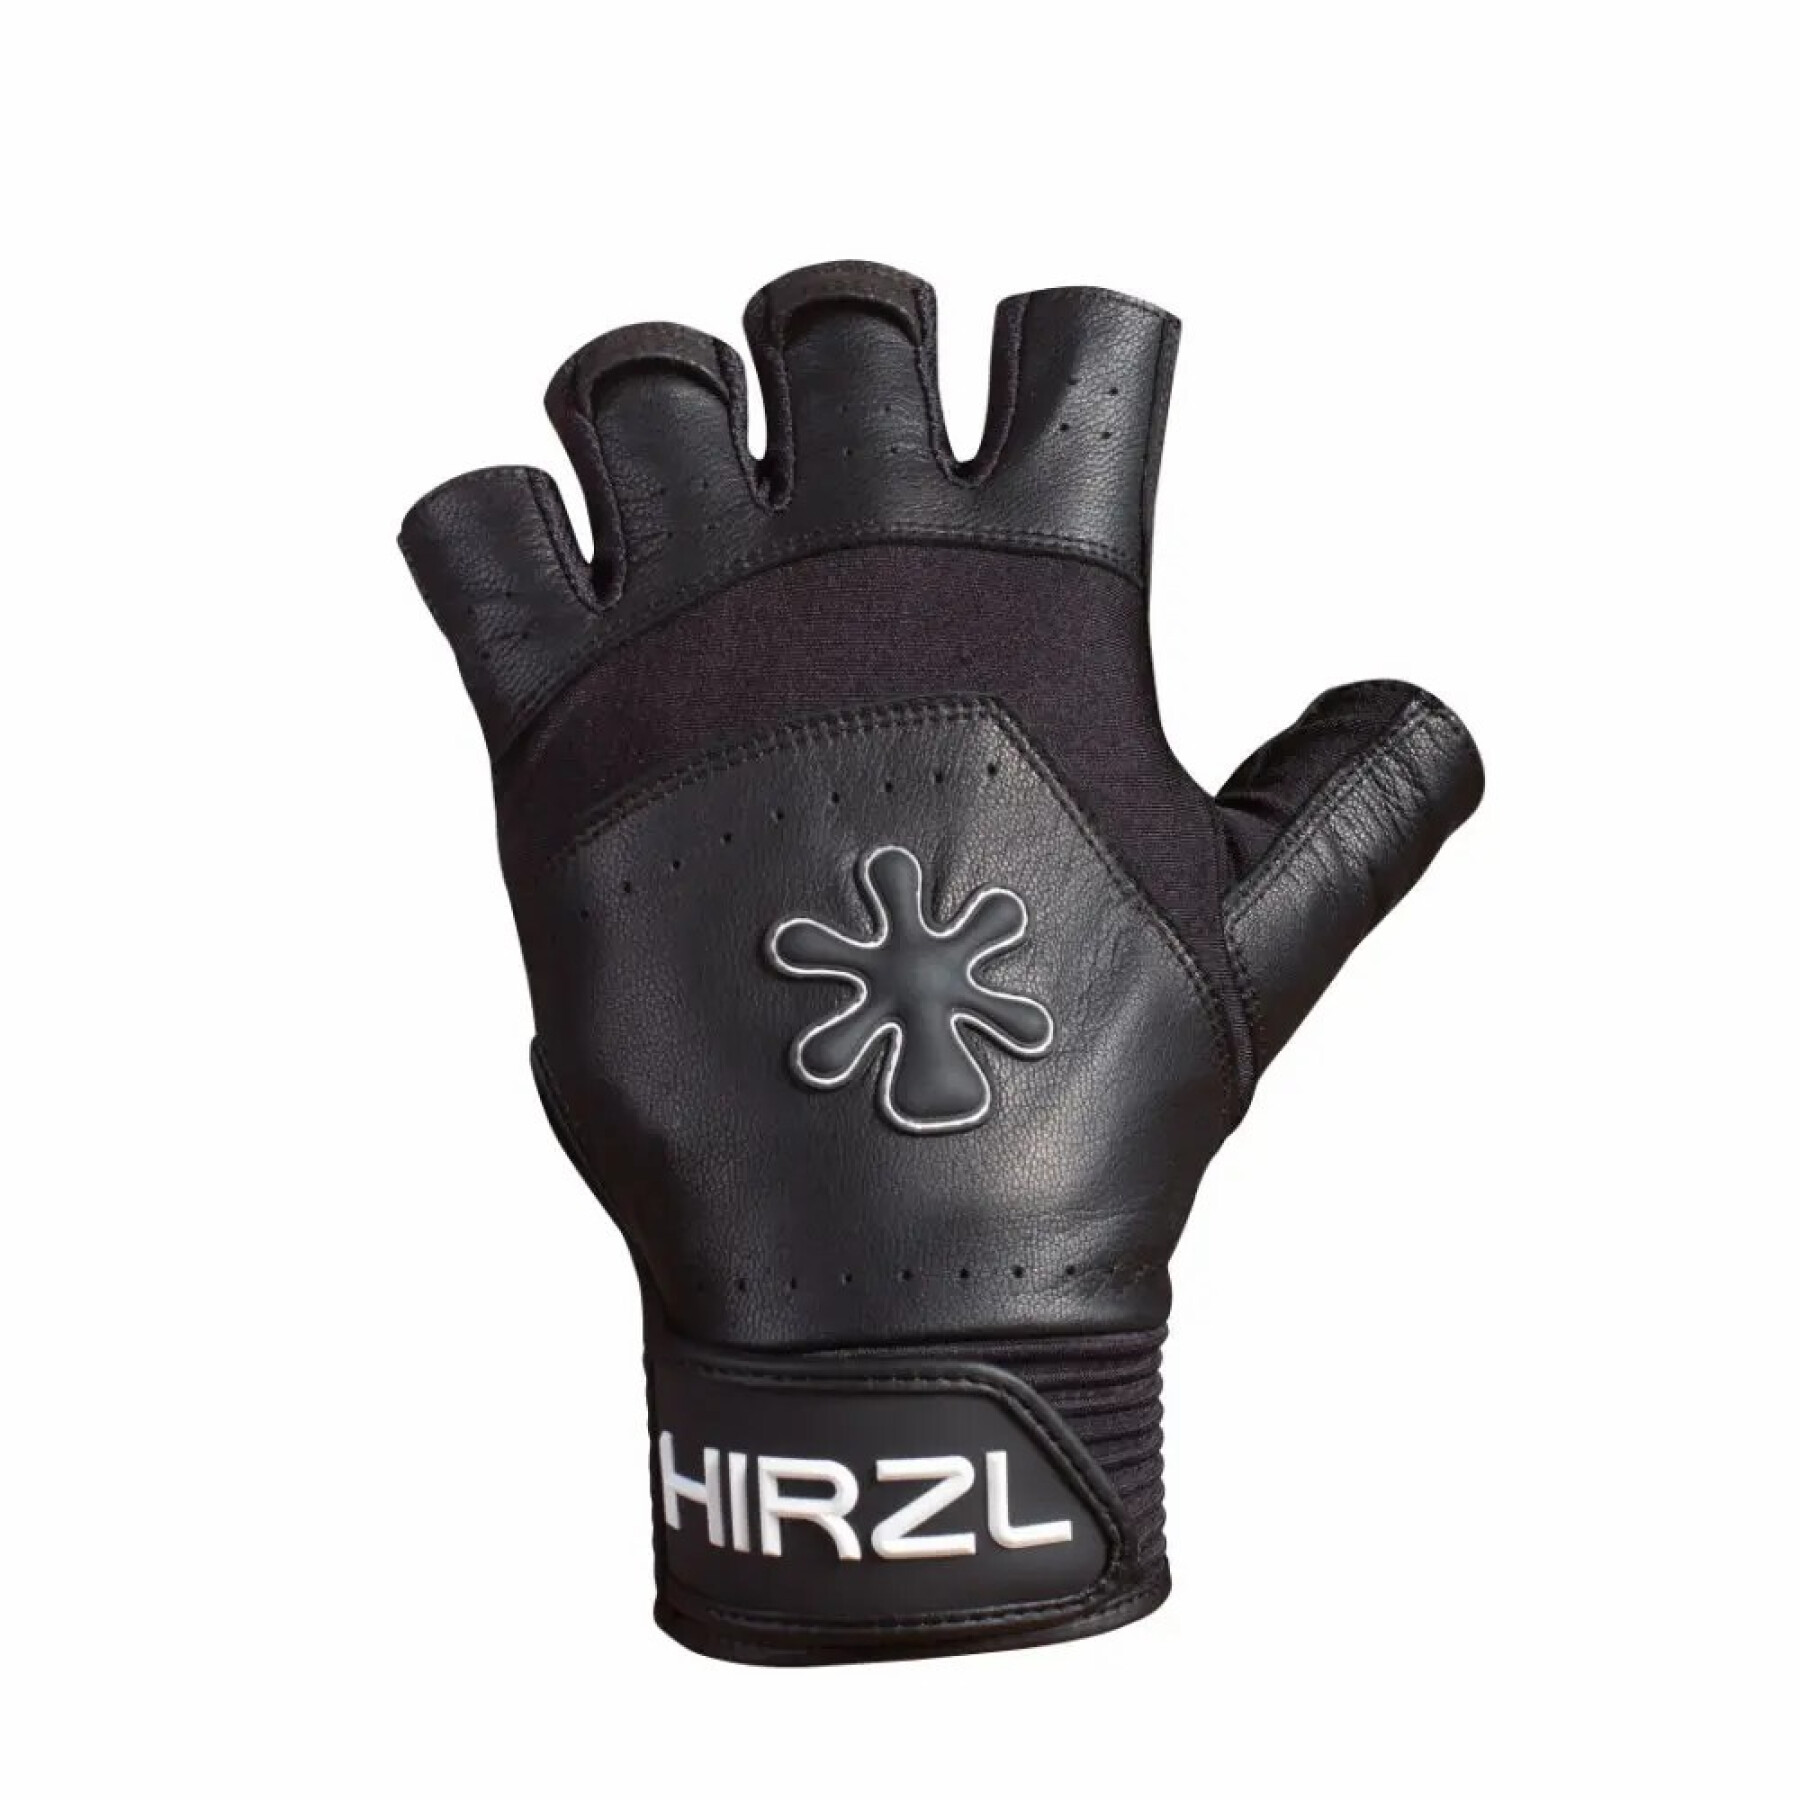 Guantes cortos Hirzl Grippp Force SF (x2)